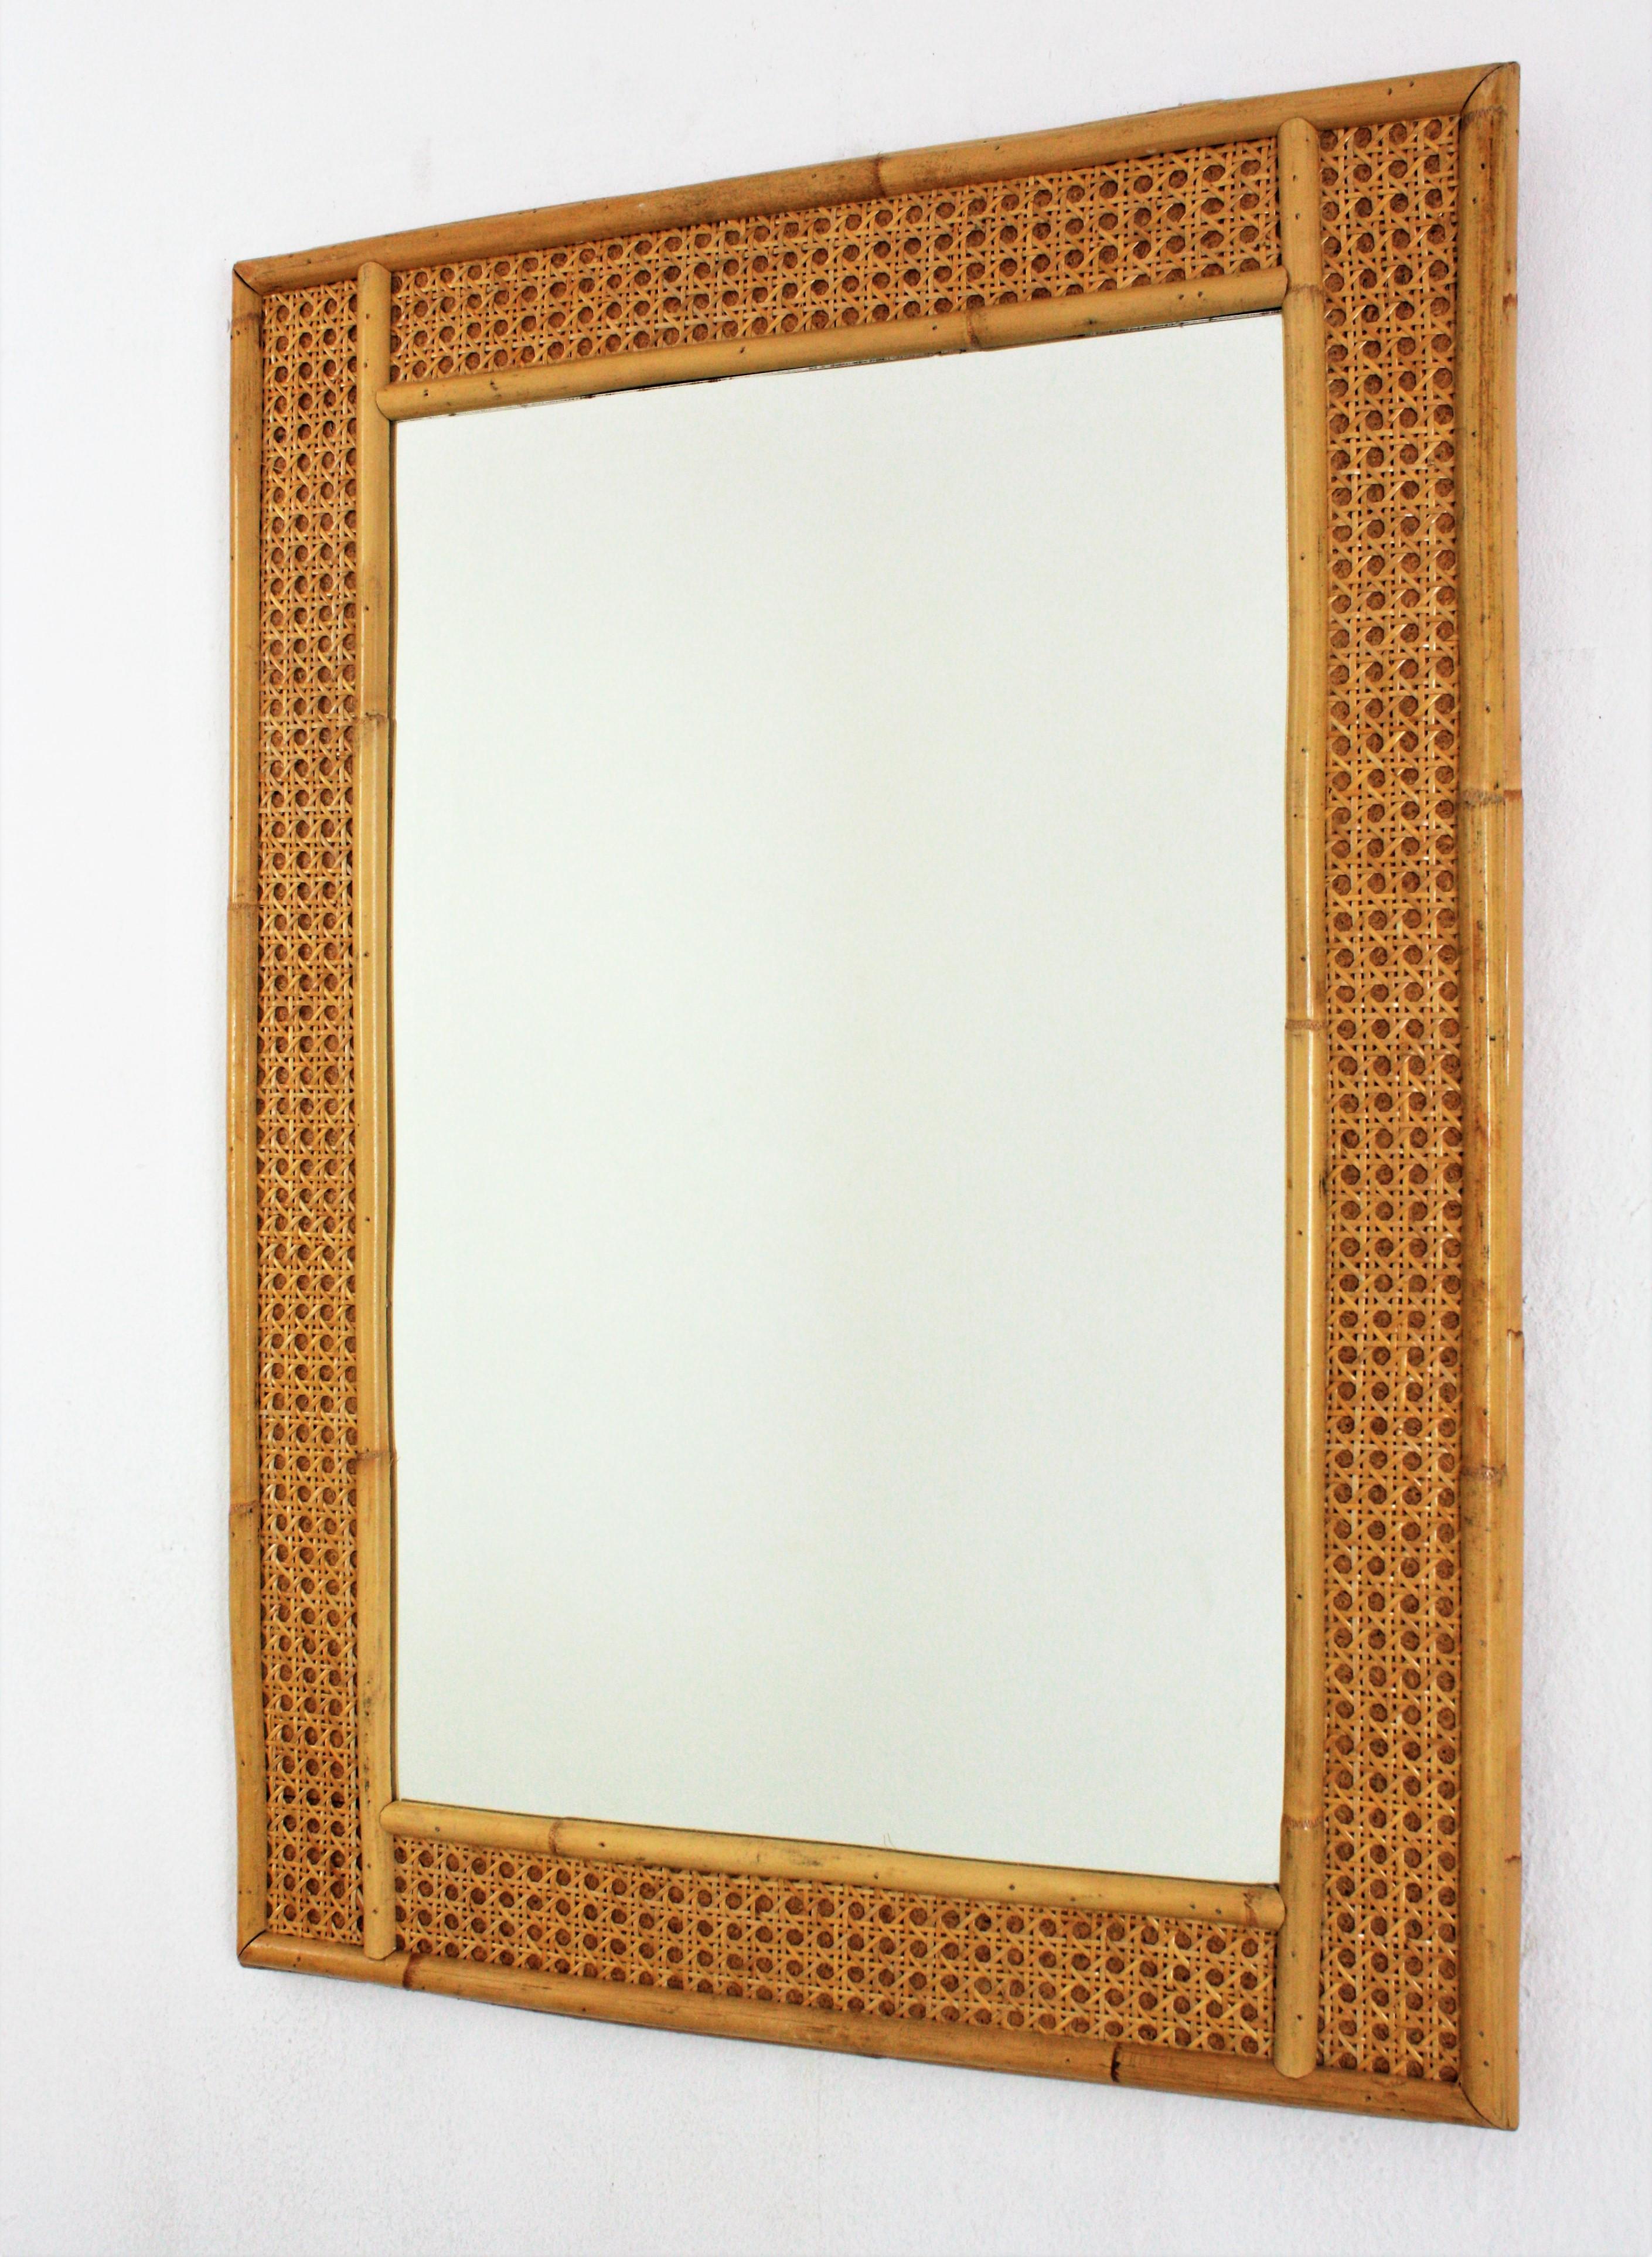 Elegant Mid-Century Modern woven wicker and bamboo mirror in the style of Christian Dior and Gabriella Crespi.
This rattan / wicker and bamboo rectangular mirror dates from the 1970s. The structure is made of bamboo, featuring a woven wicker center